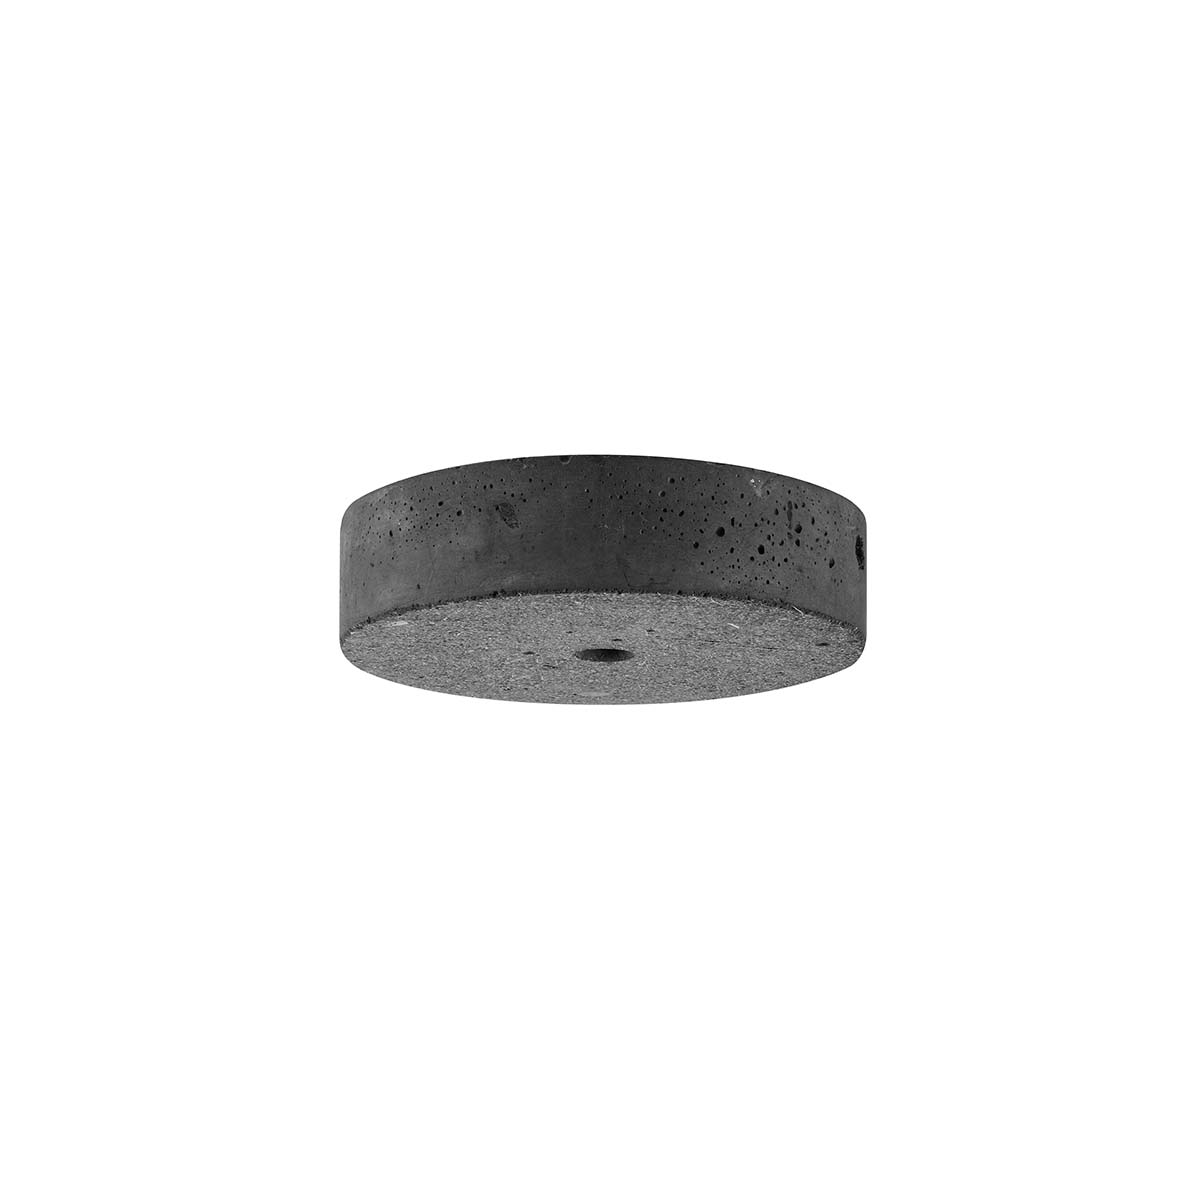 Tangla lighting - TLCP024-01AR - Water stone 1 Light round canopy stage - anthracite